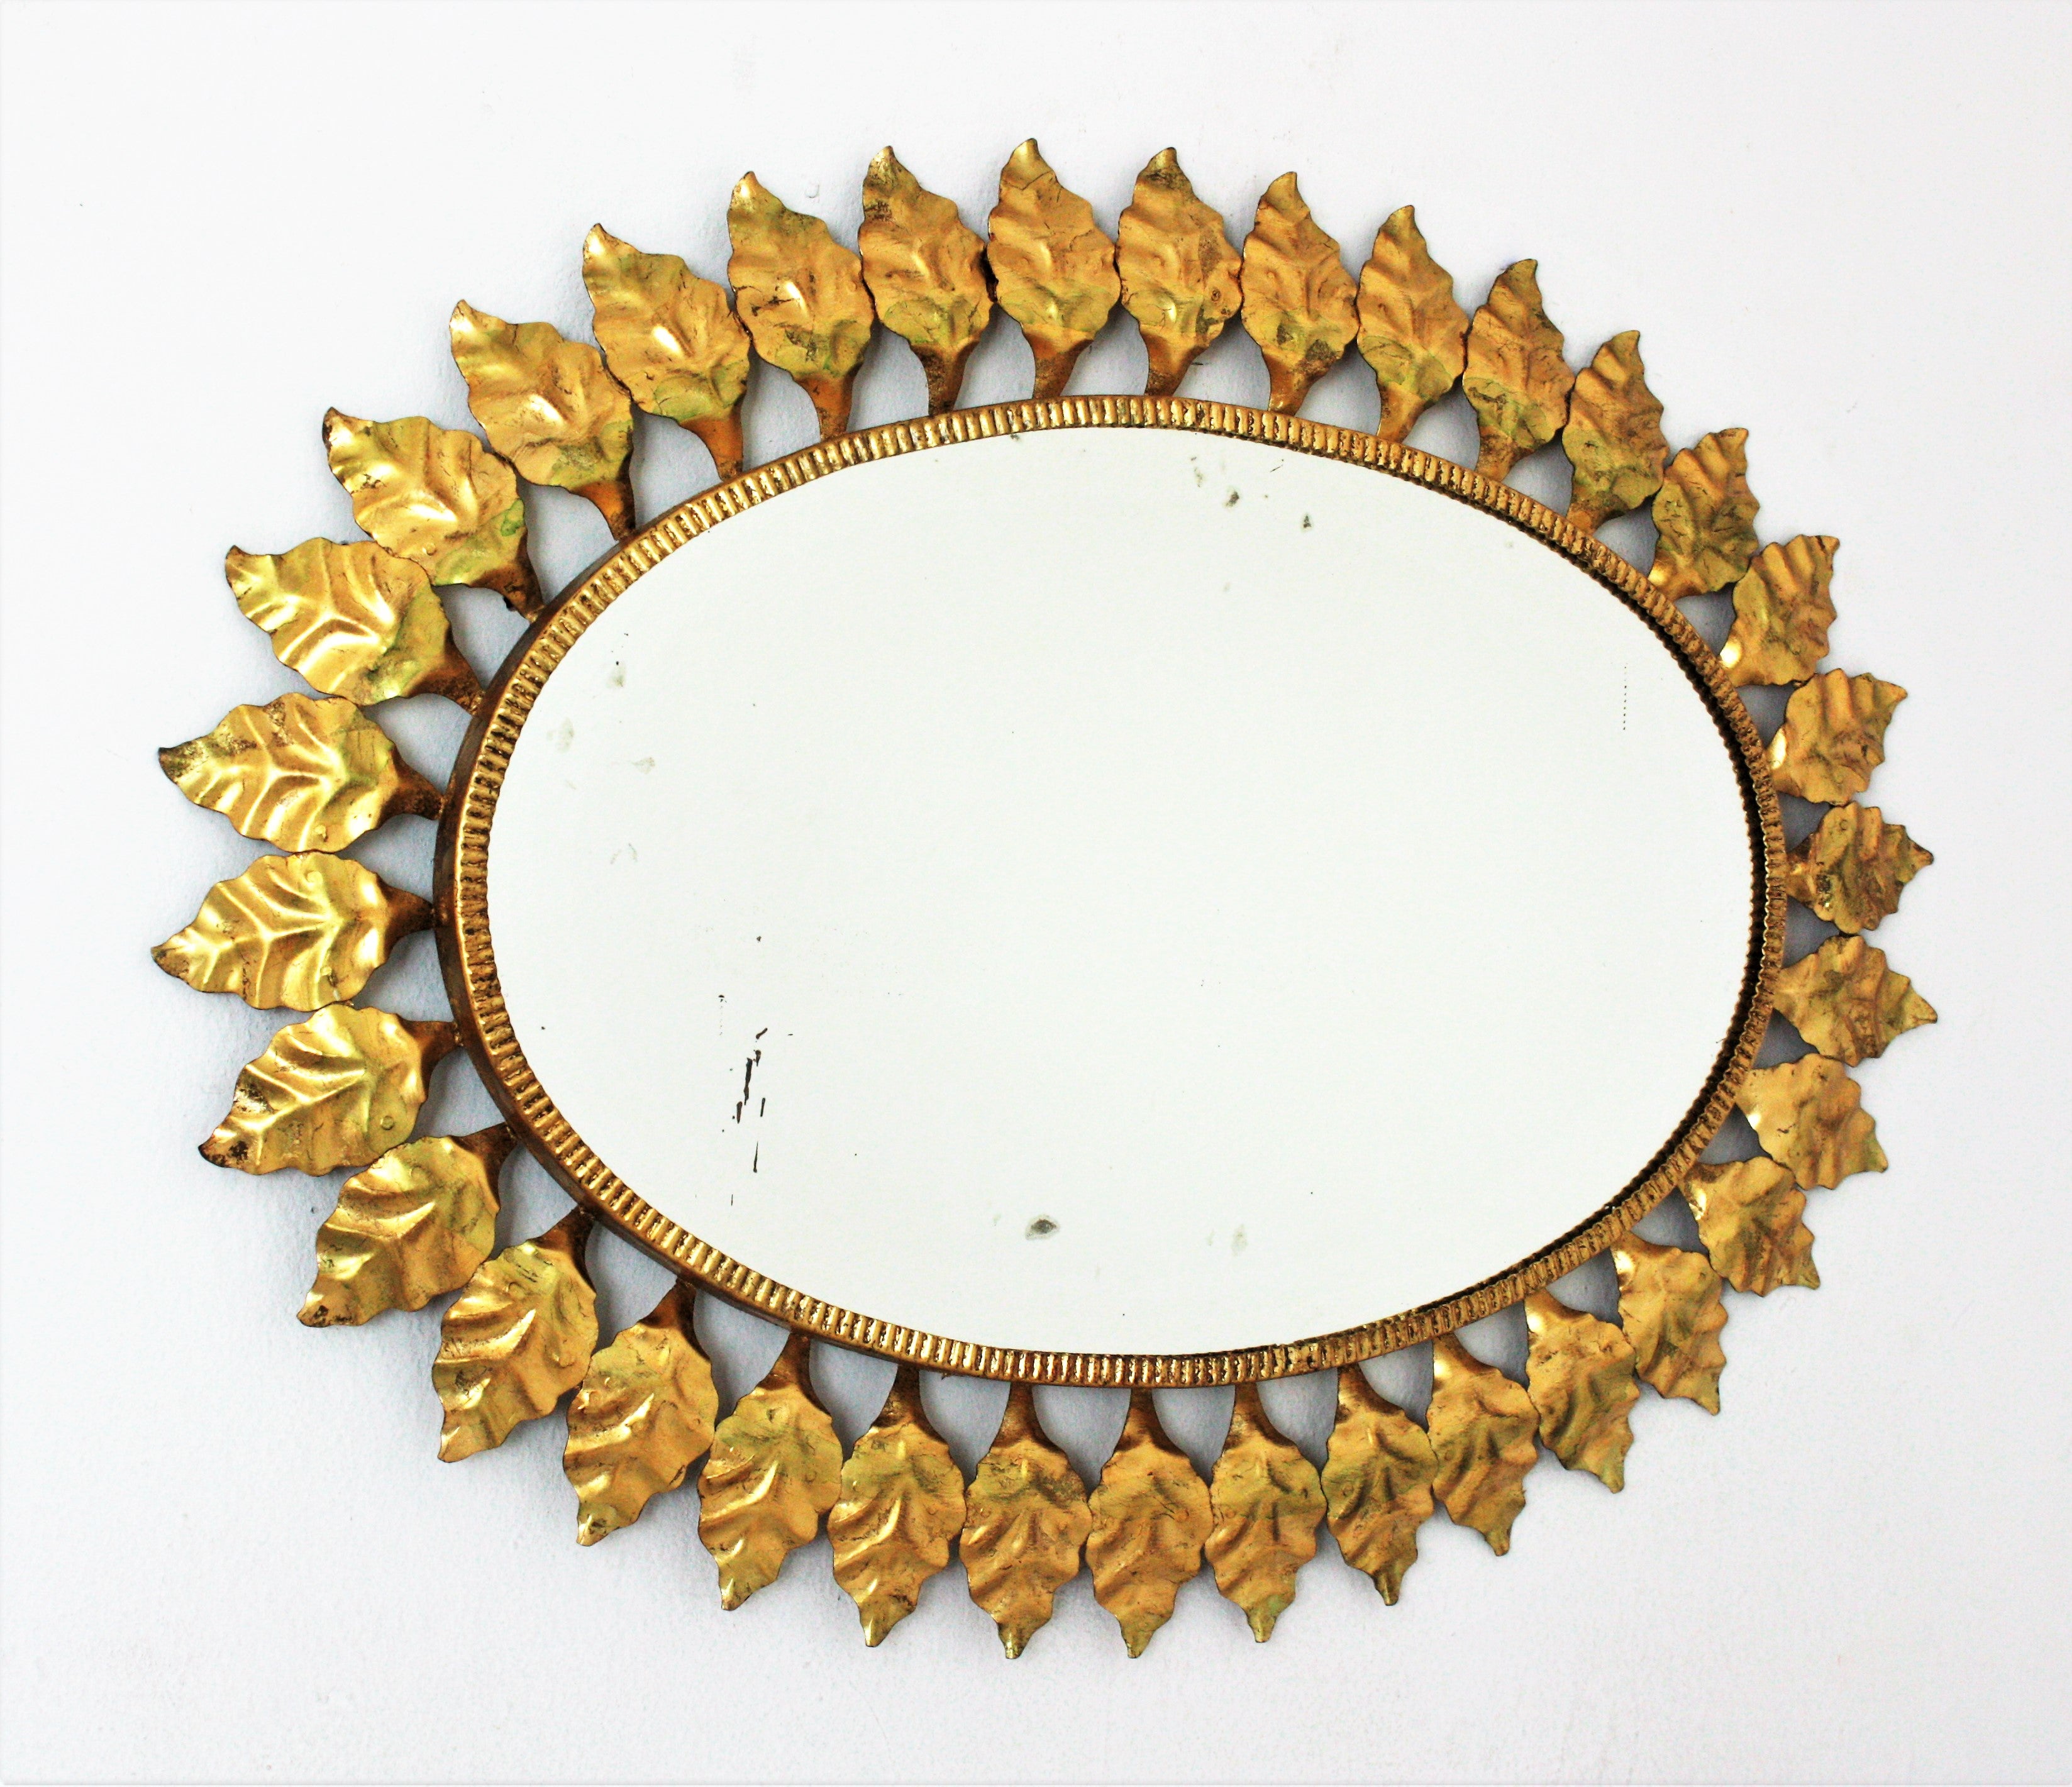 Large Mid-Century Modern wrought iron sunburst oval wall mirror with gold leaf finish, Spain, 1950s.
This highly decorative leafed sunburst gilt iron mirror has a nice color. It has terrific aged patina showing its original gold leaf gilding.
A